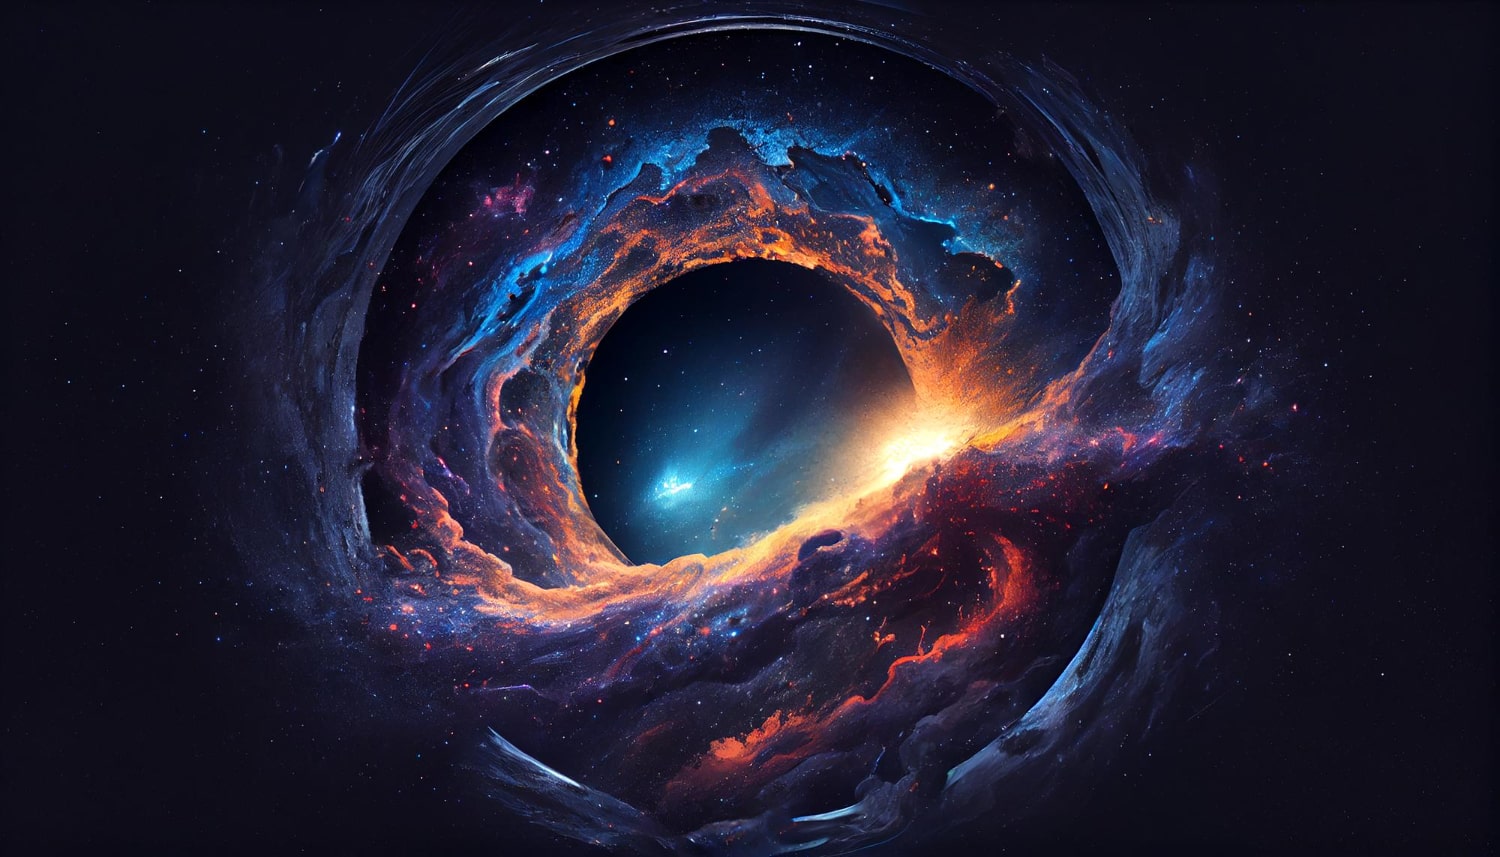 30 interesting facts about Black Hole